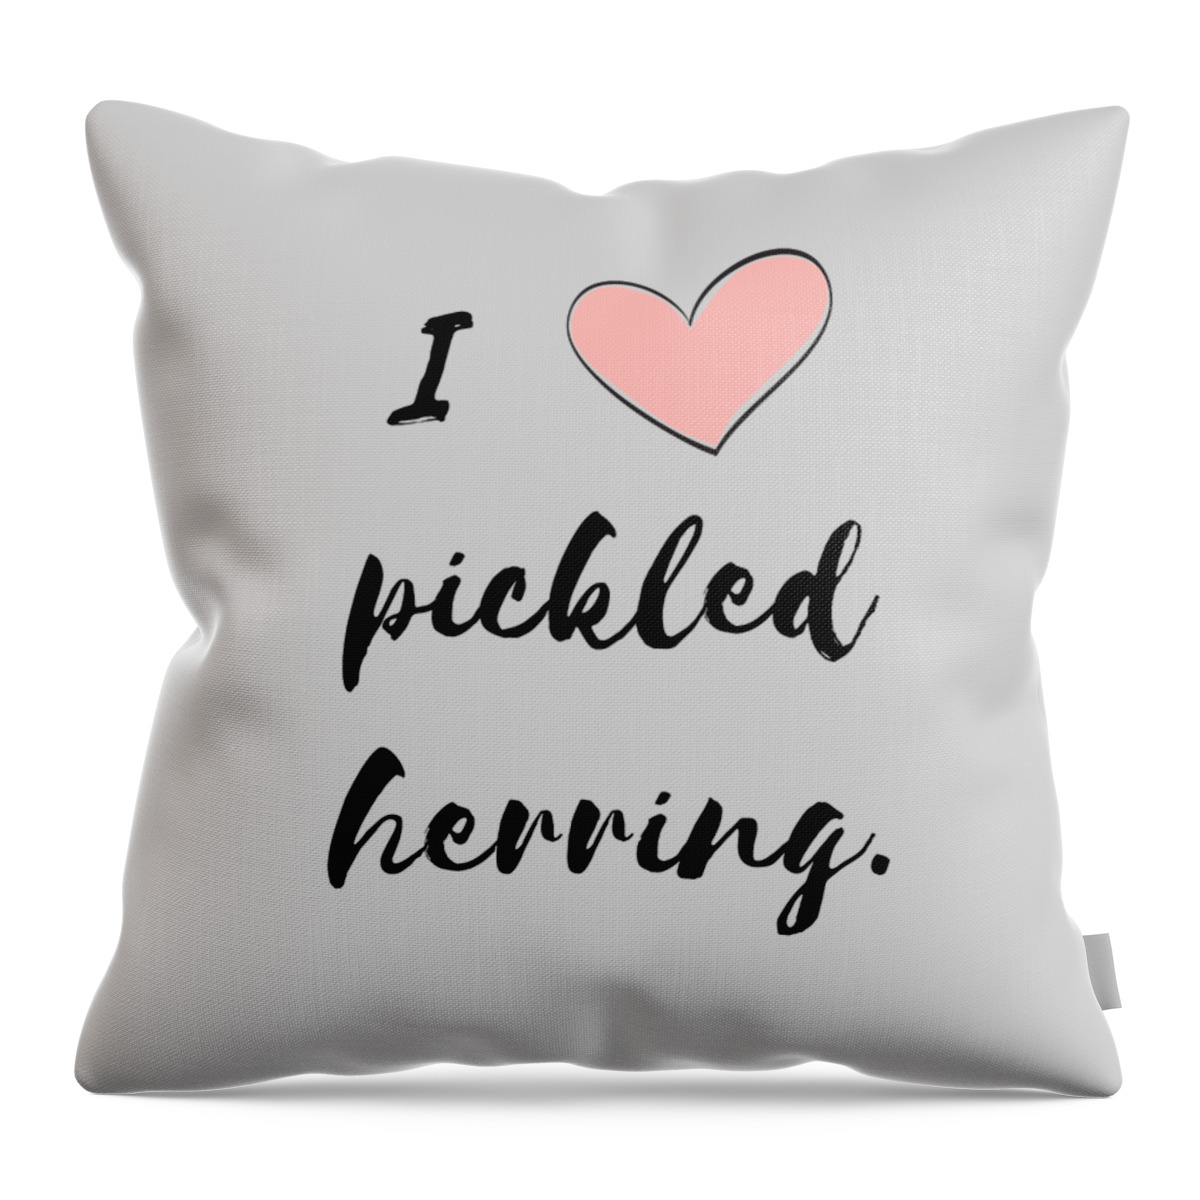 Pickled Herring Throw Pillow featuring the digital art I Love Pickled Herring by Christie Olstad